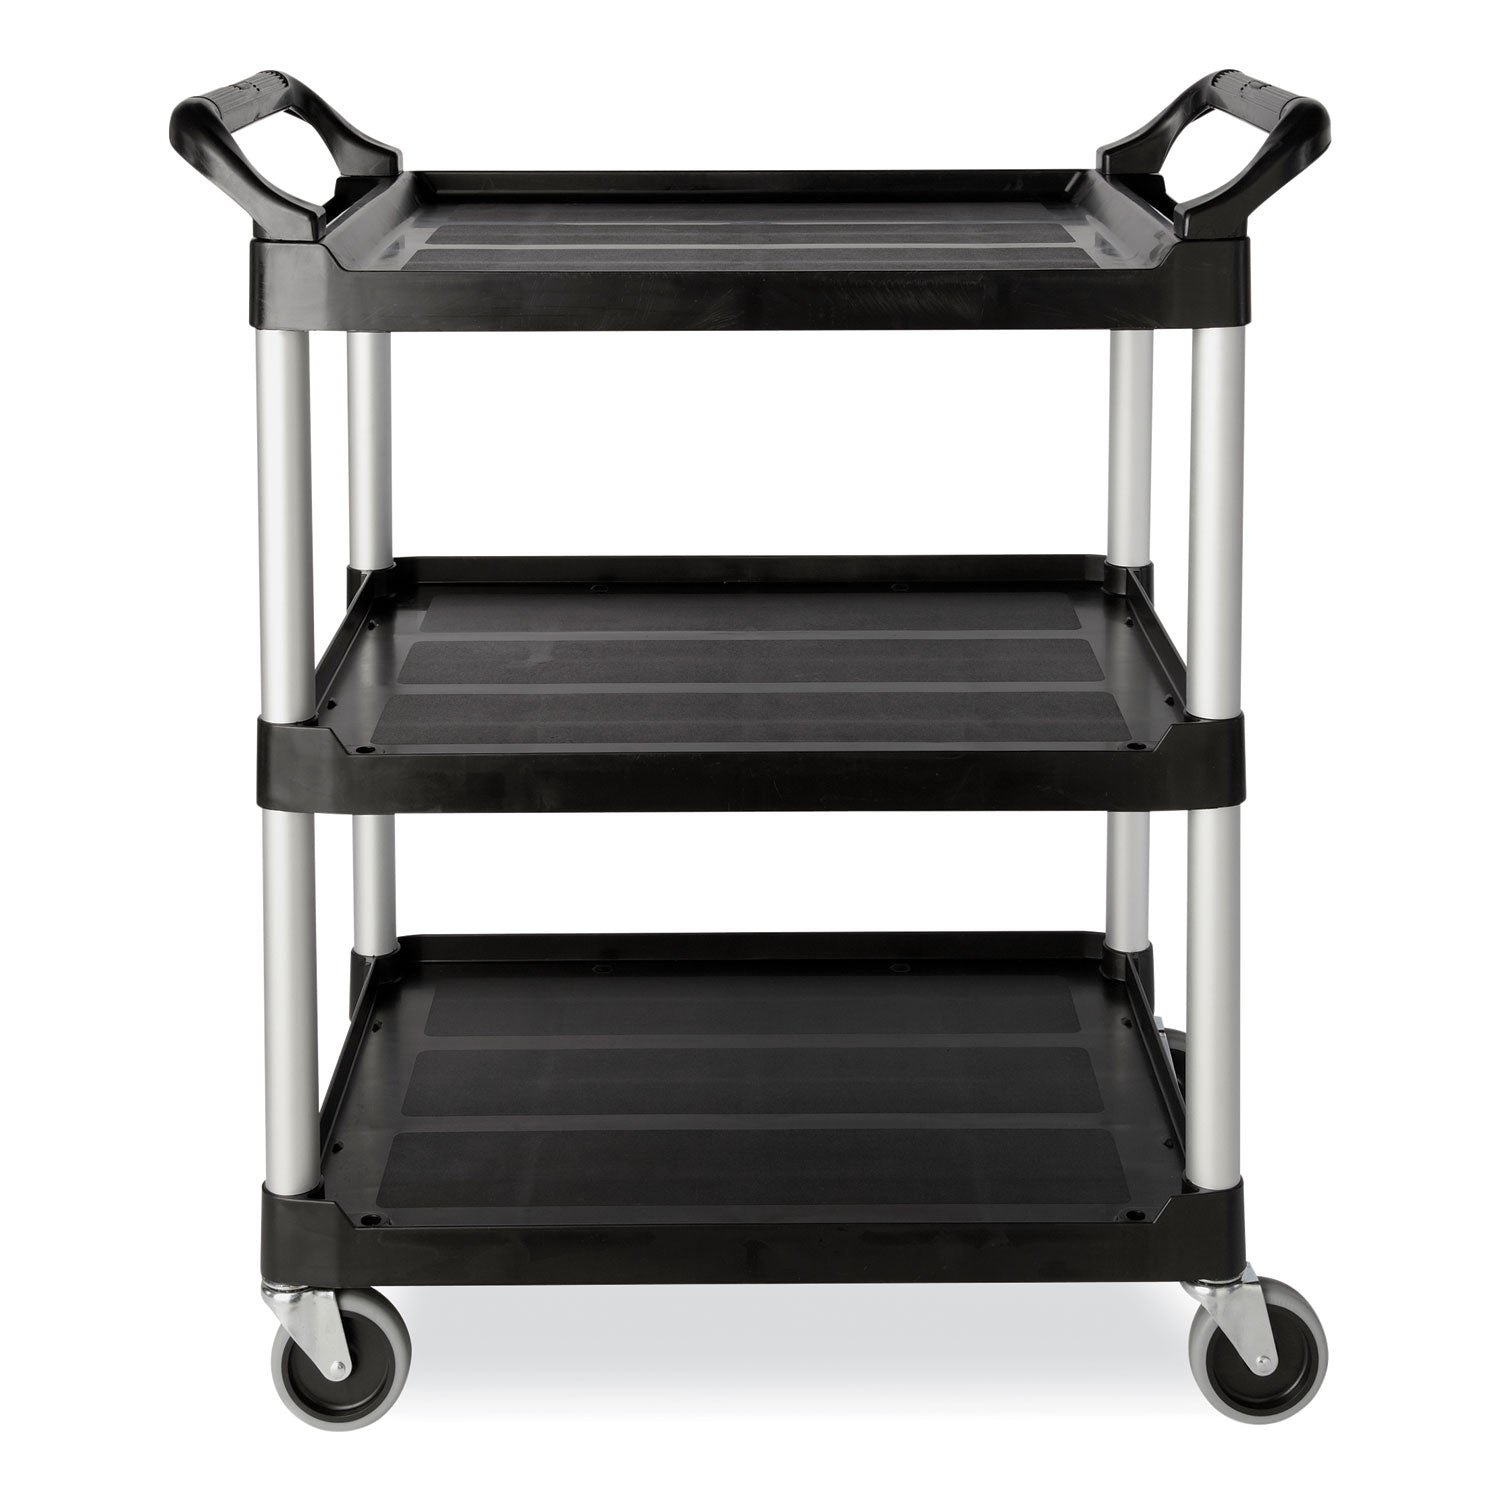 Xtra Utility Cart with Open Sides, Plastic, 3 Shelves, 300 lb Capacity, 40.63" x 20" x 37.81", Black - 